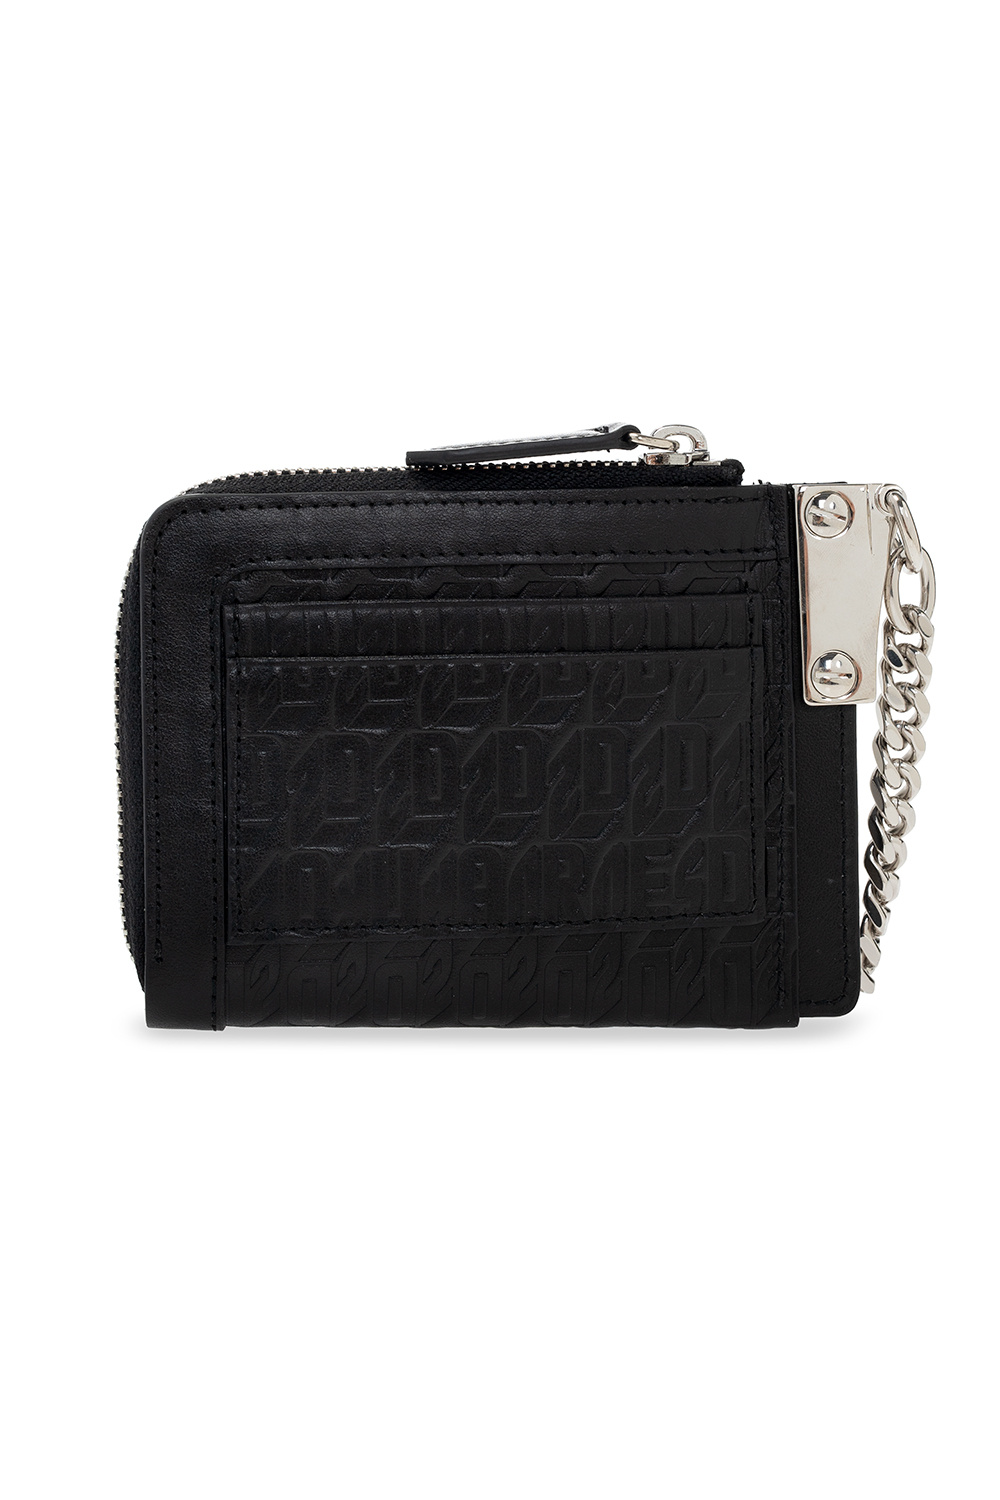 Dsquared2 DSQUARED2 WALLET WITH CHAIN